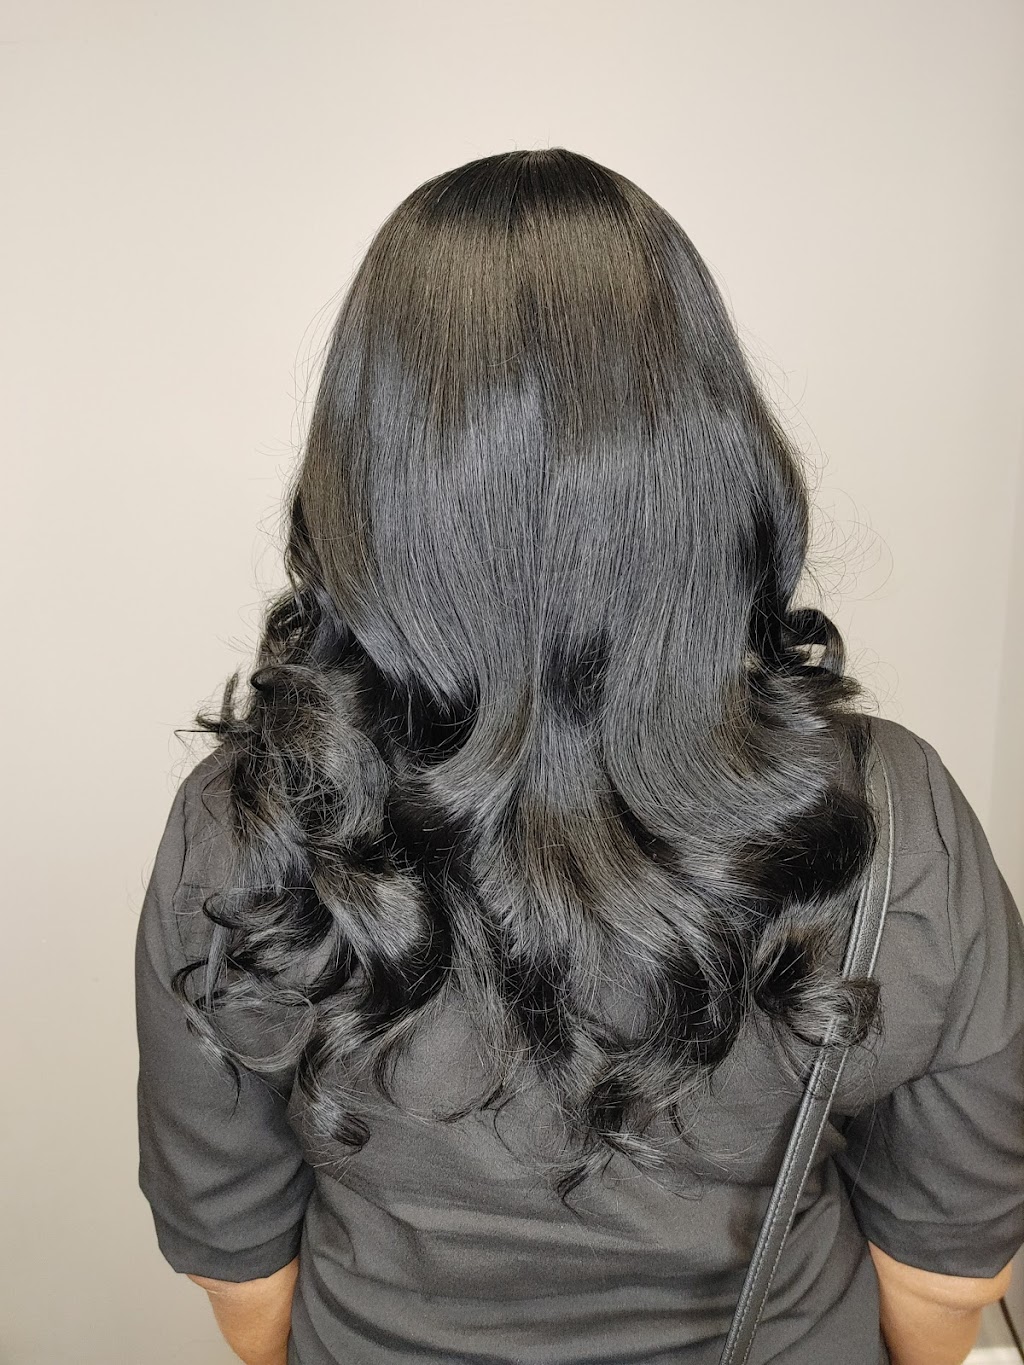 STYLES BY ANGIE | 5135 Mayfield Rd, Lyndhurst, OH 44124 | Phone: (440) 319-6238